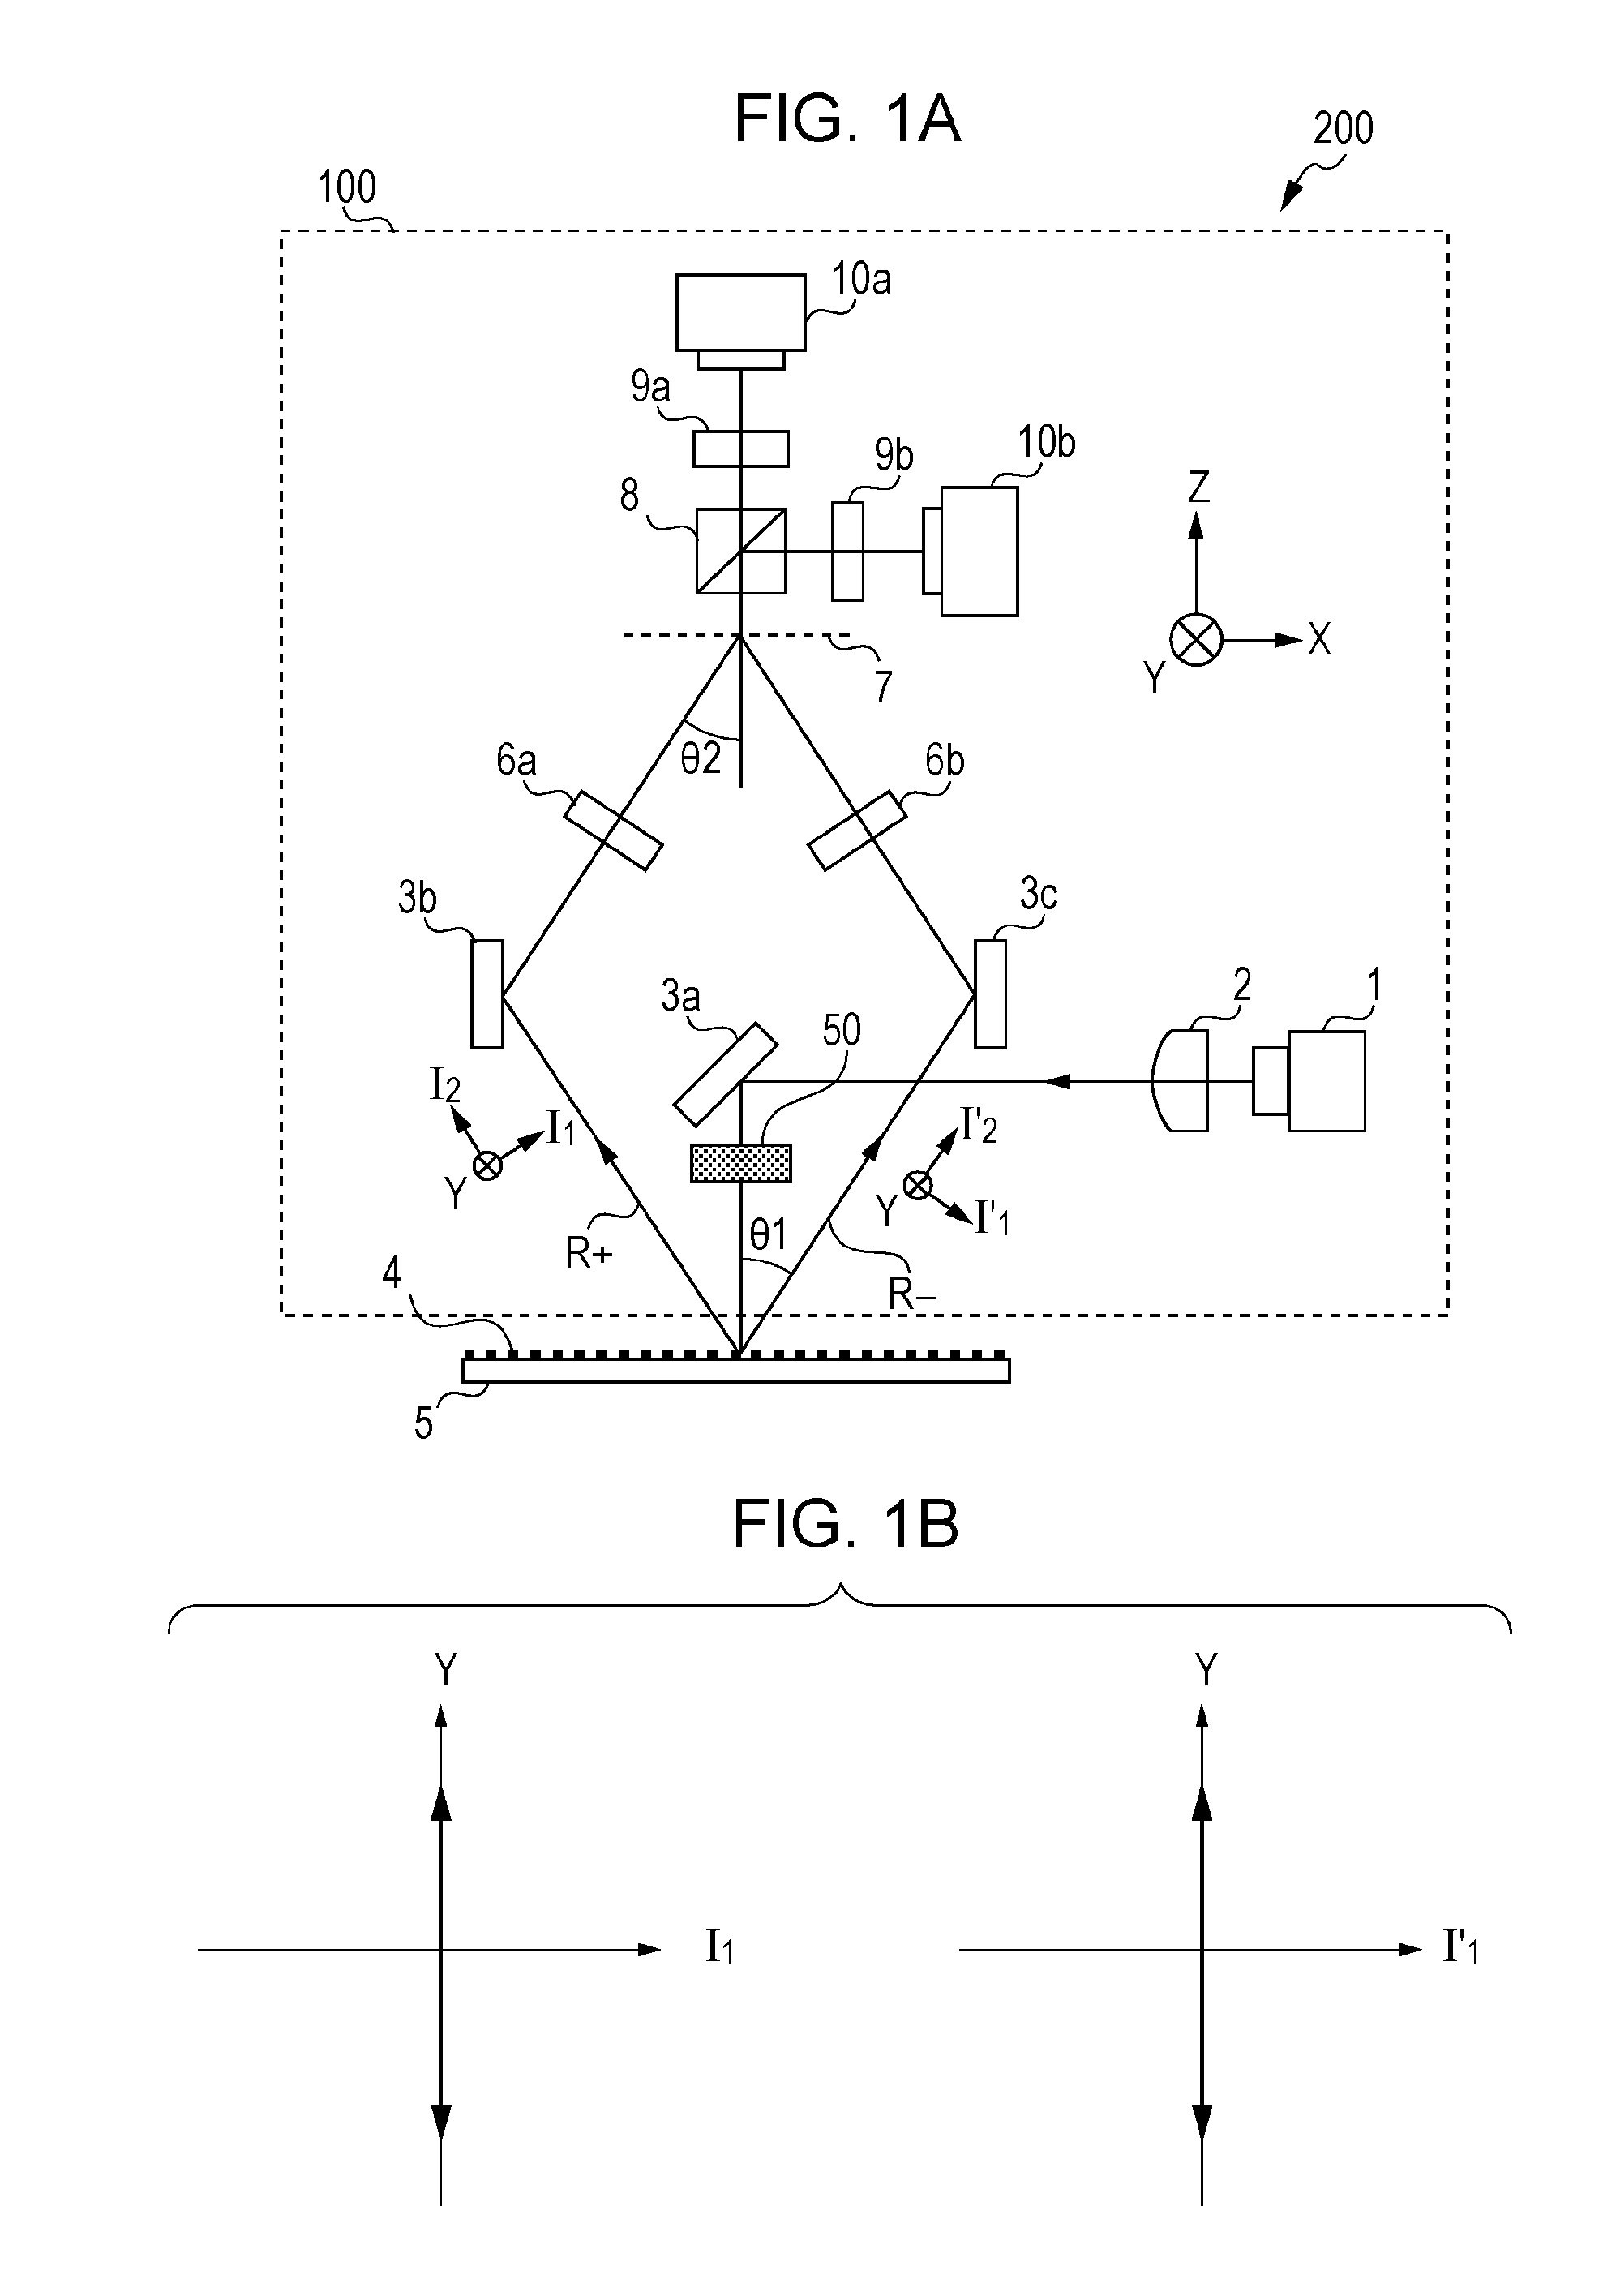 Displacement measurement device, exposure apparatus, and working device